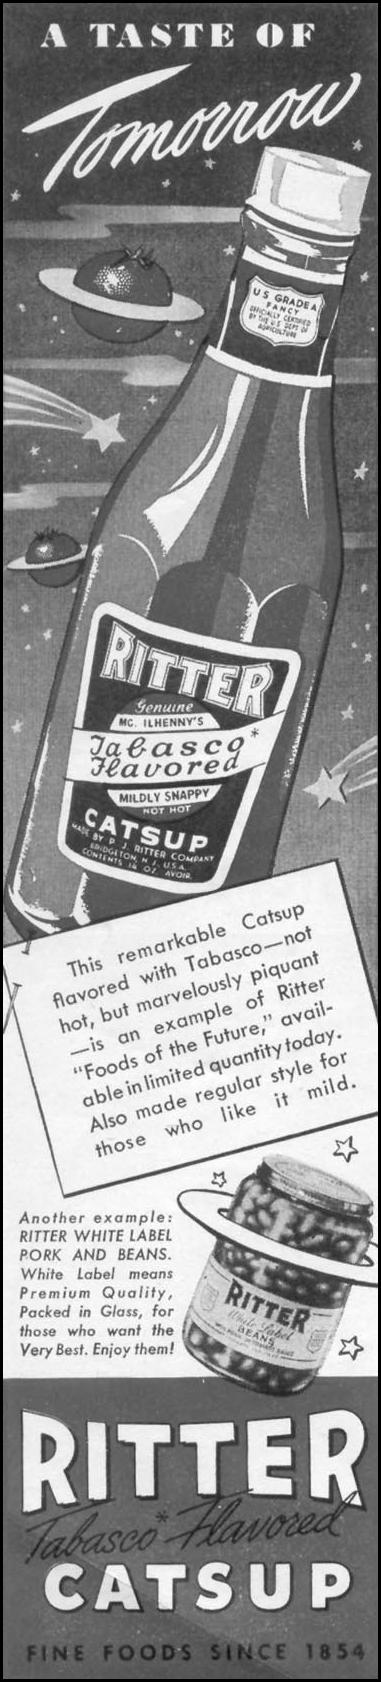 RITTER TABASCO FLAVORED CATSUP
WOMAN'S DAY
11/01/1945
p. 14